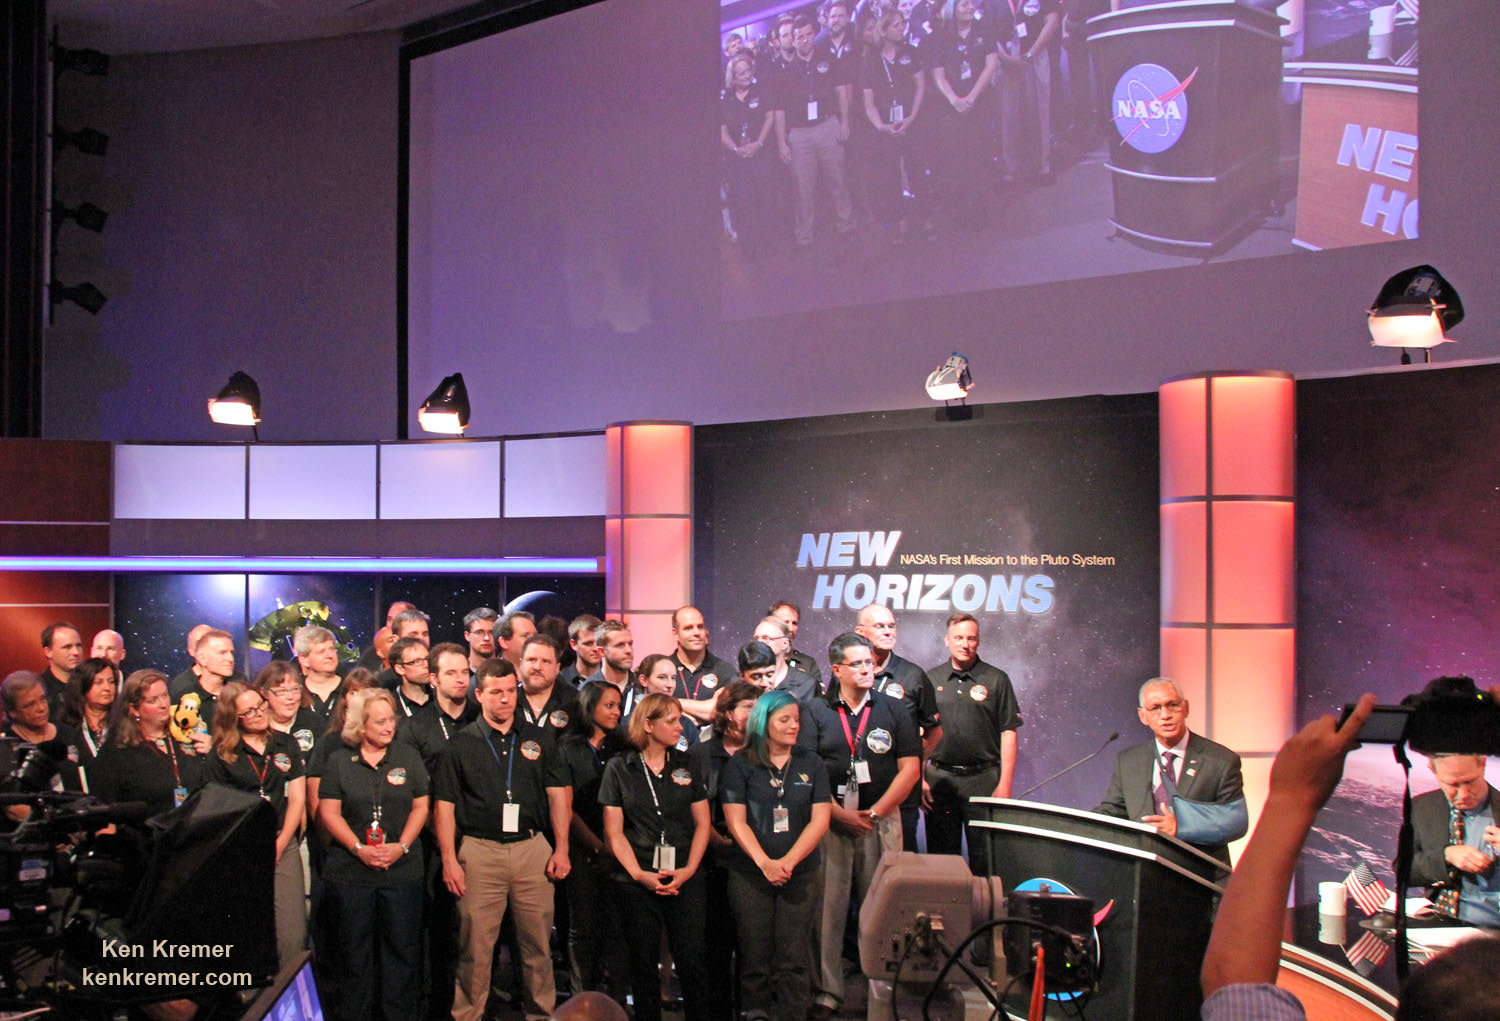 NASA Administrator Charles Bolden congratulates the New Horizons team after successful Pluto flyby on July 14, 2015, to cheering crowd at the Johns Hopkins University Applied Physics Laboratory (APL) in Laurel, Maryland, during  live NASA TV media briefing. Credit: Ken Kremer/kenkremer.com